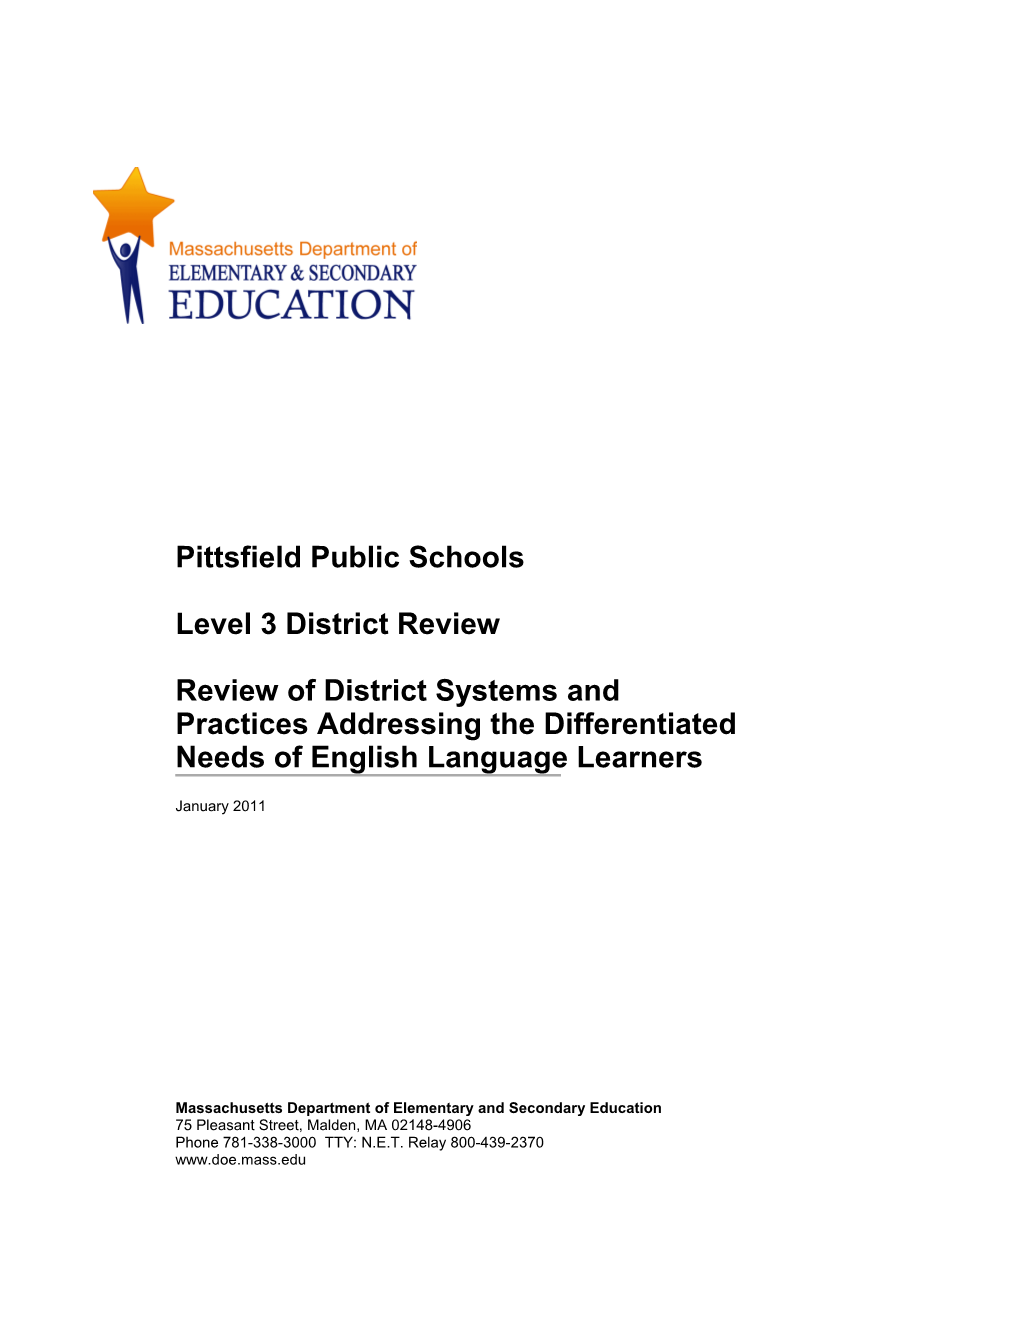 Pittsfield Public Schools, Level 3 And Differentiated Needs-LEP-Review Report, January 2011